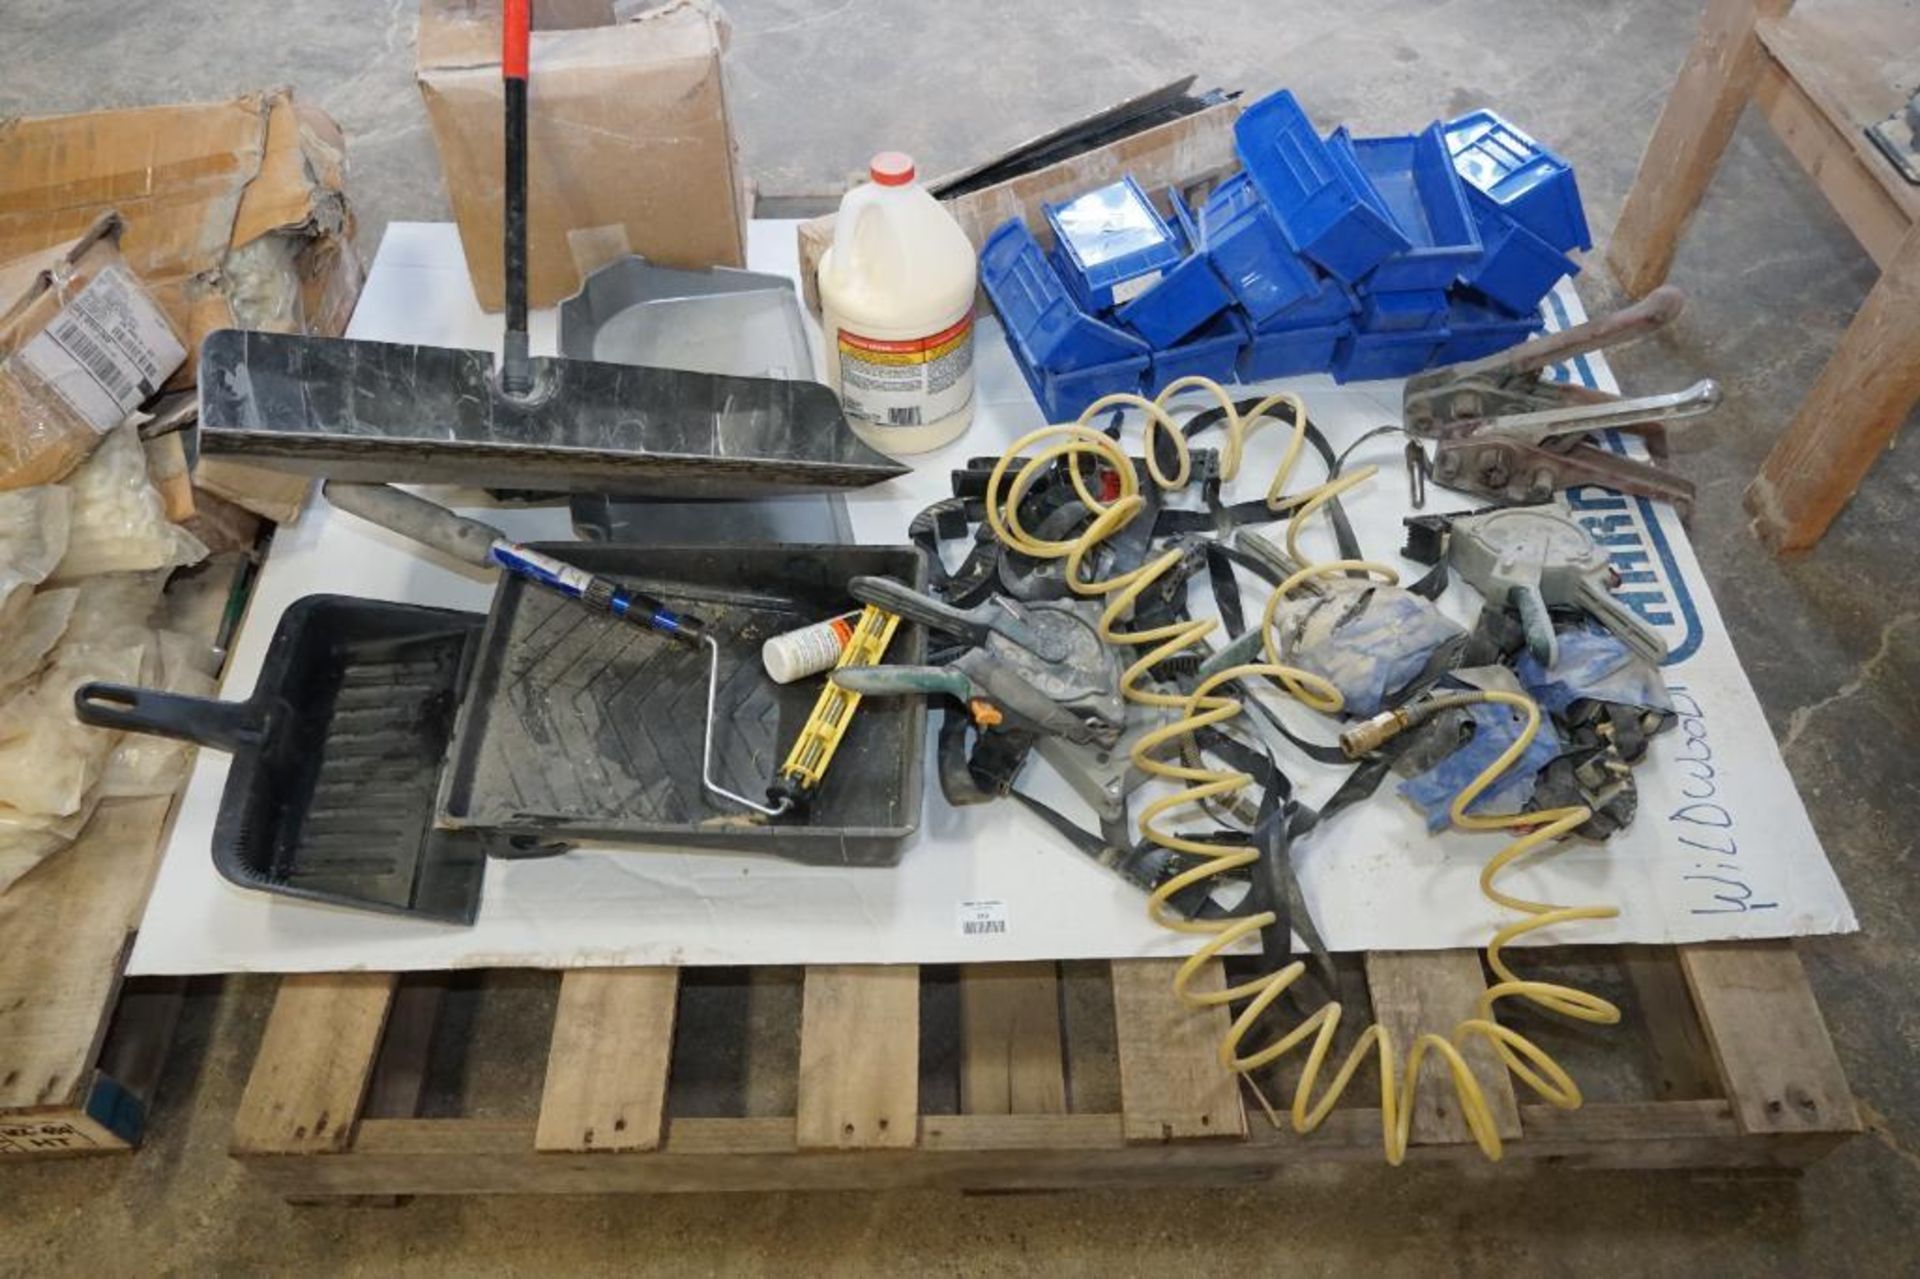 Banding Tools, Plastic Totes, Dust Pans, Wood Glue and more